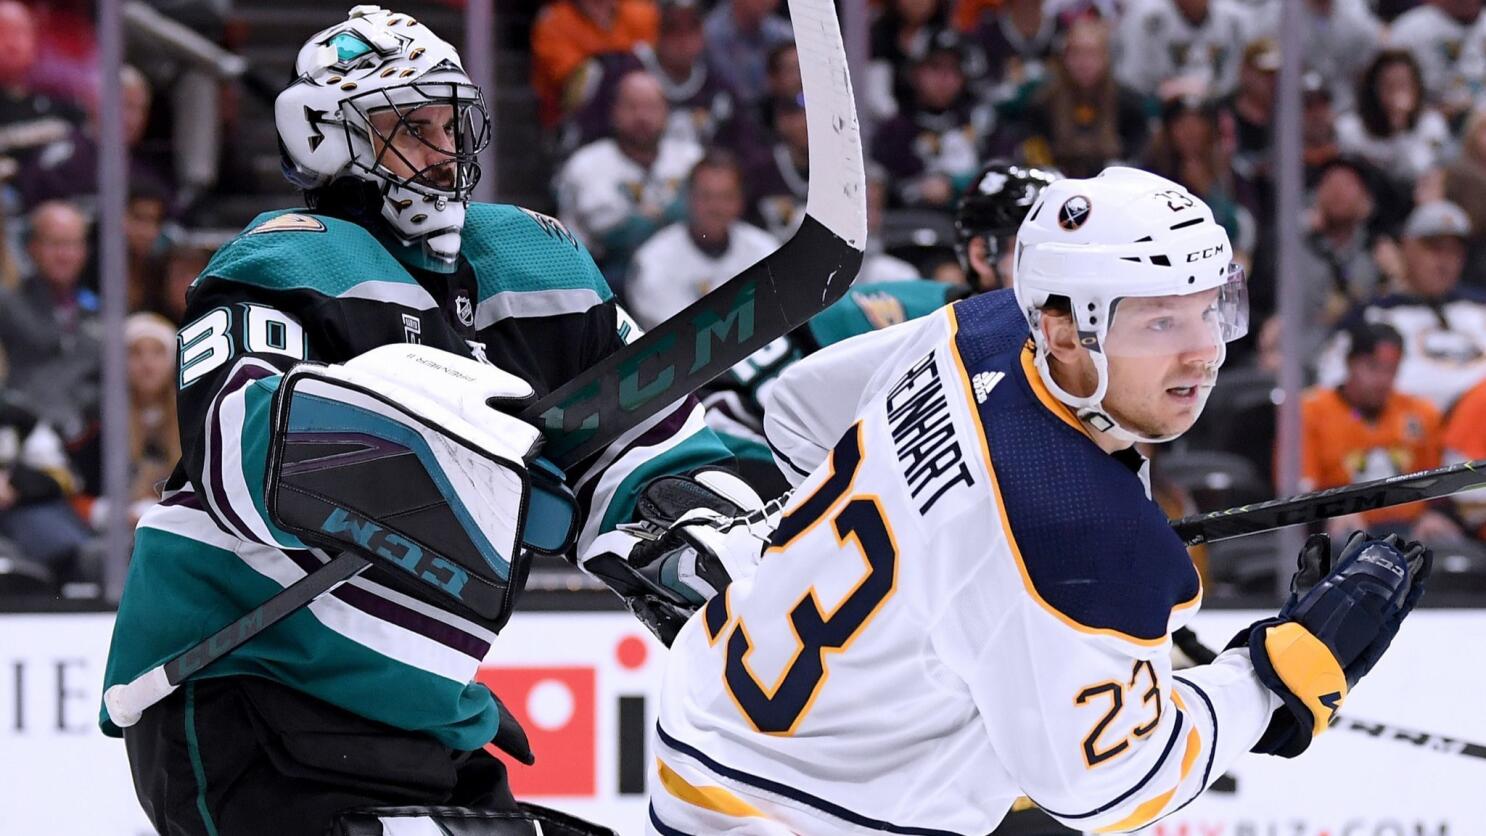 Buffalo Sabres - It's official. Ryan Miller Night is